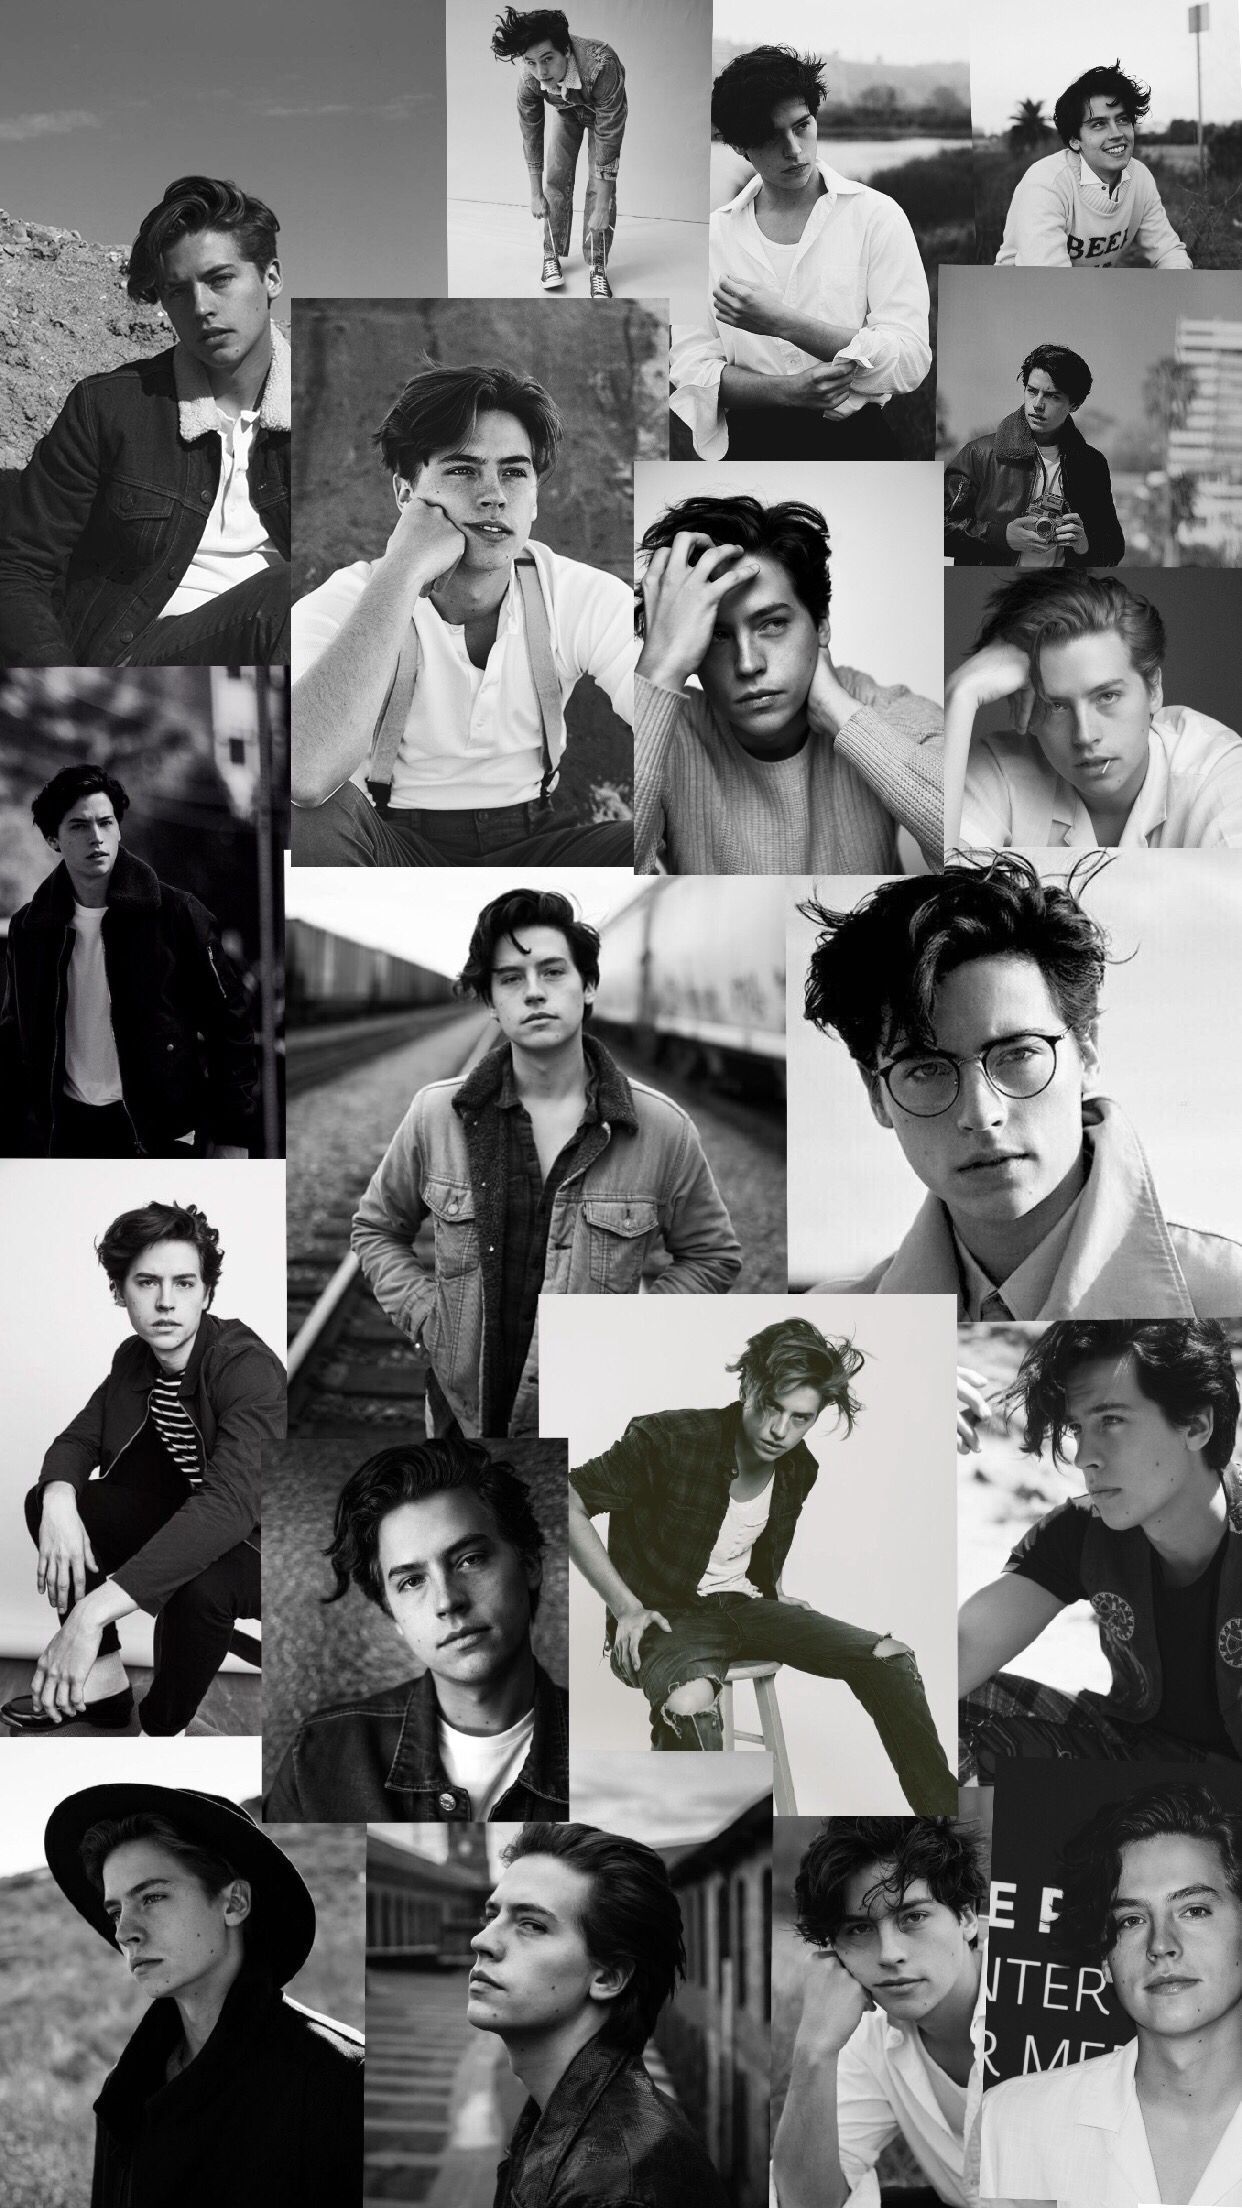 colesprouse #wallpaper #riverdale #coleanddylansprouse